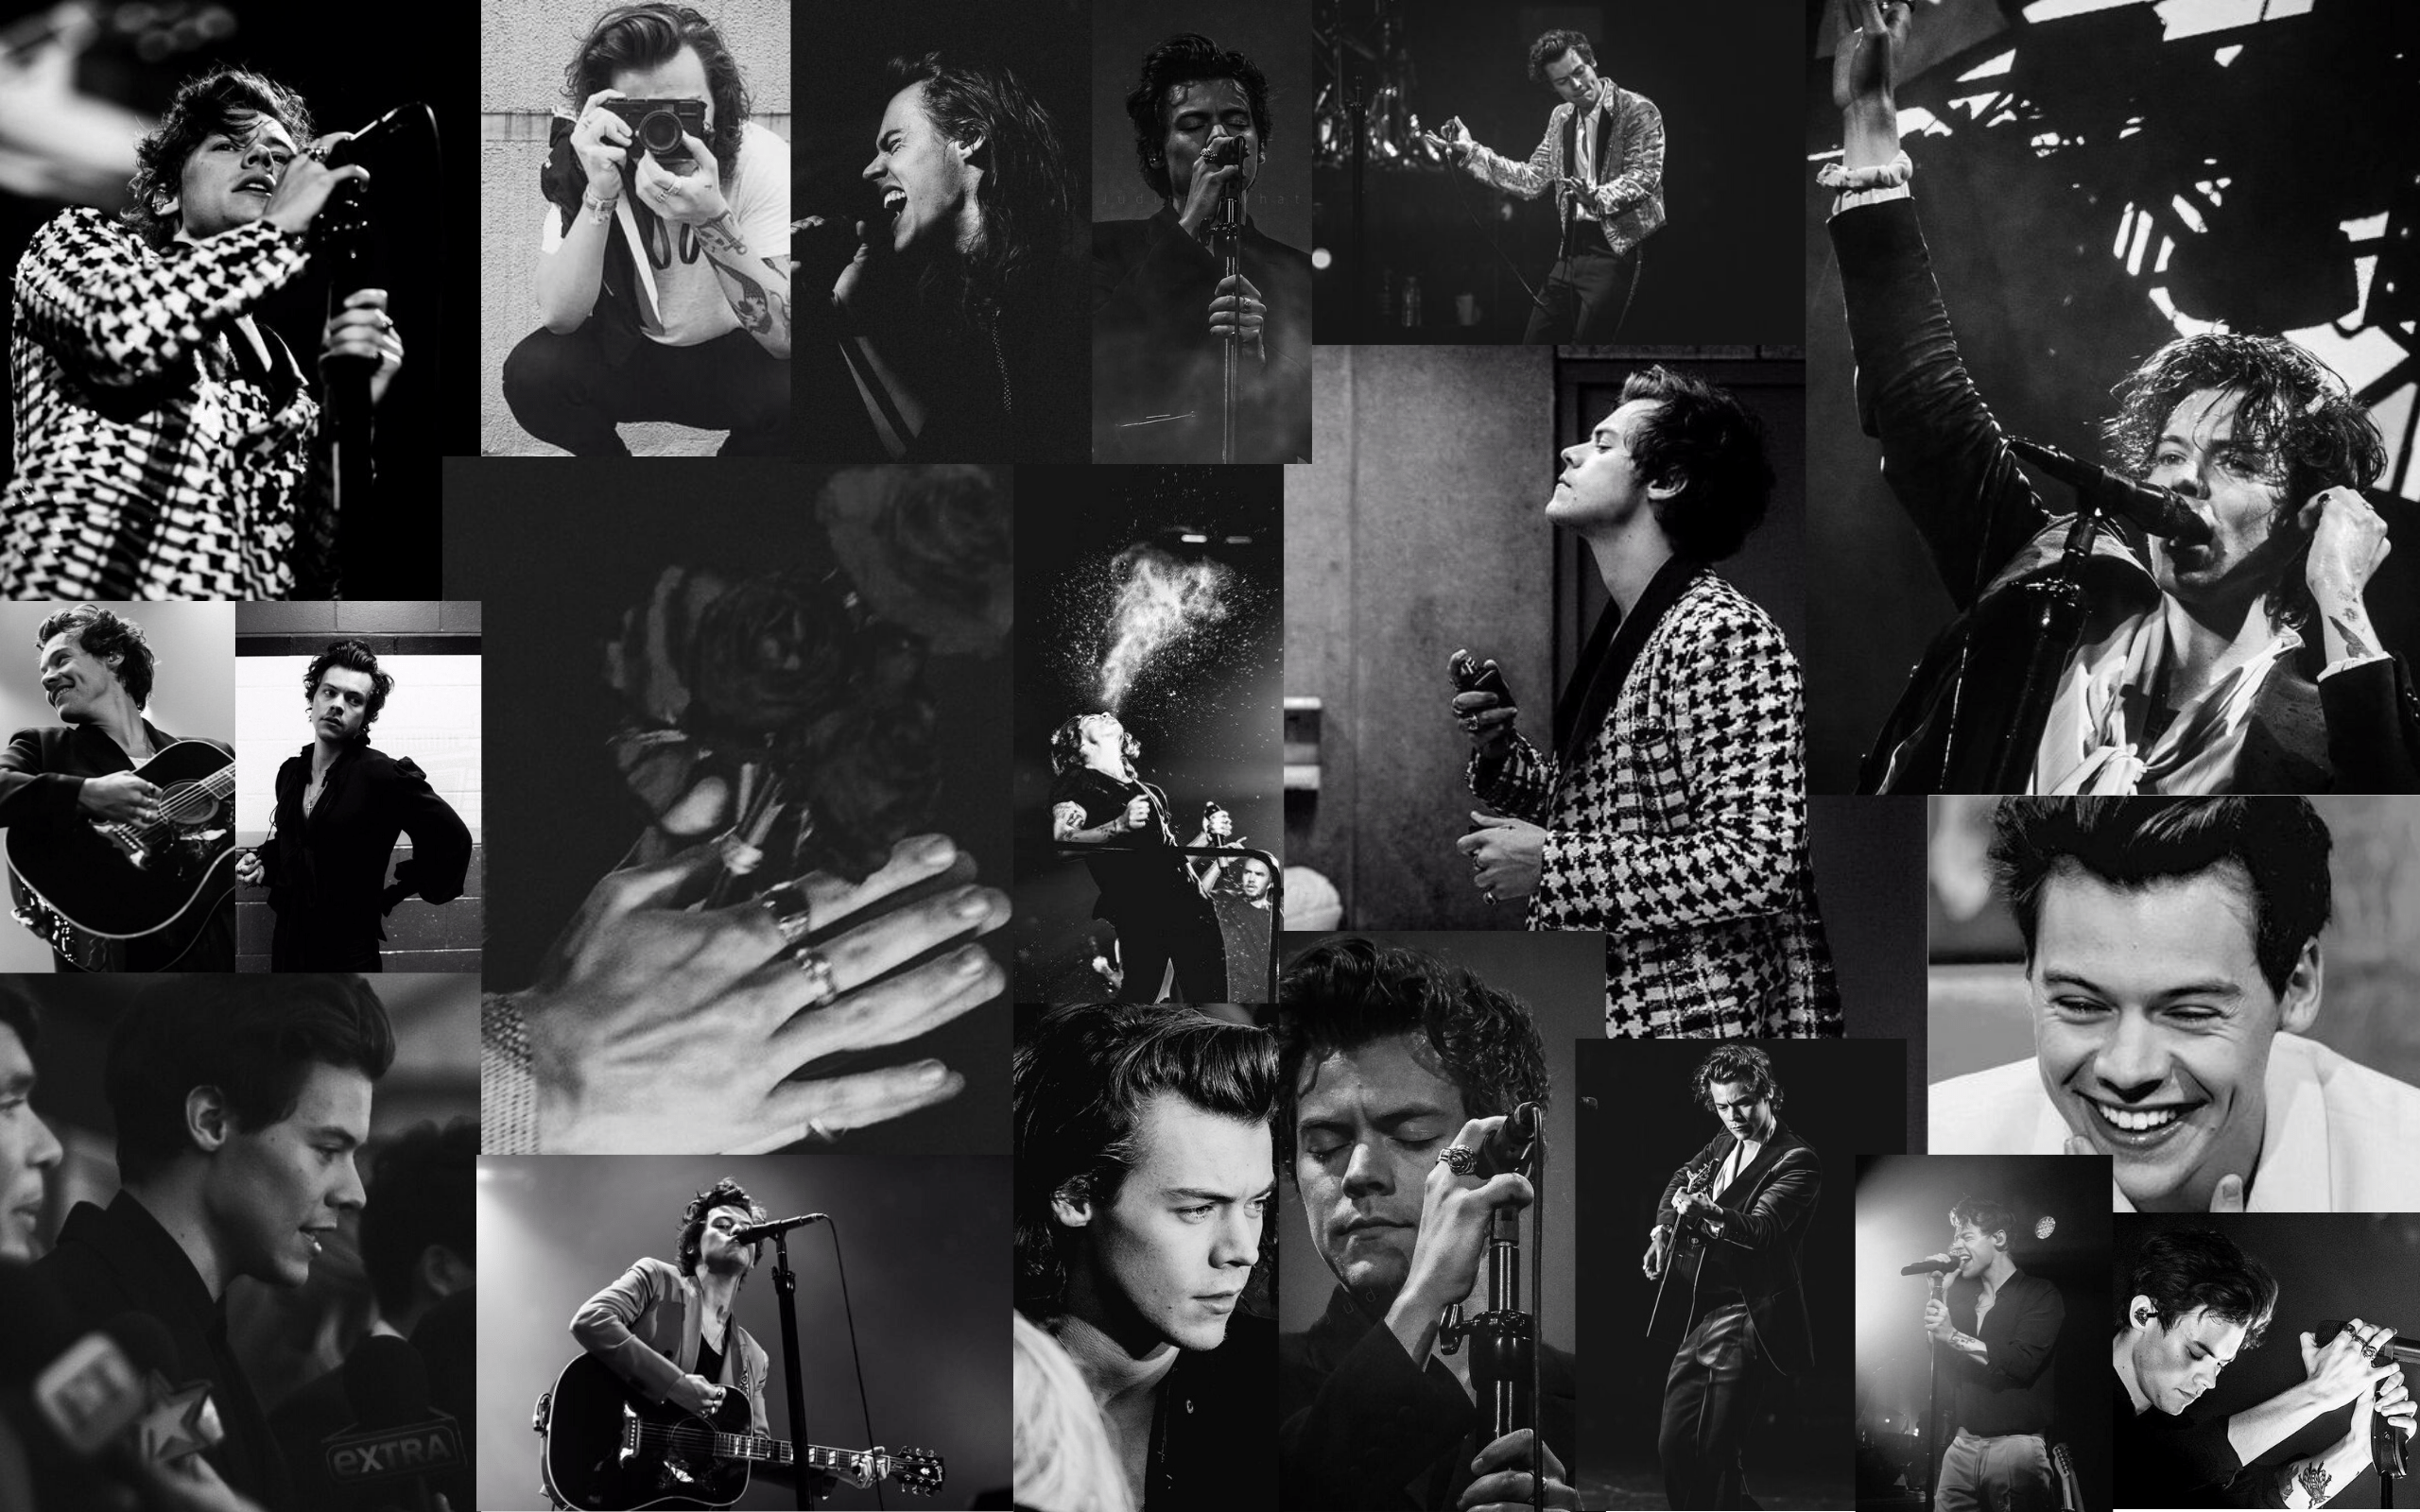 The wallpaper of a person, musician - Harry Styles